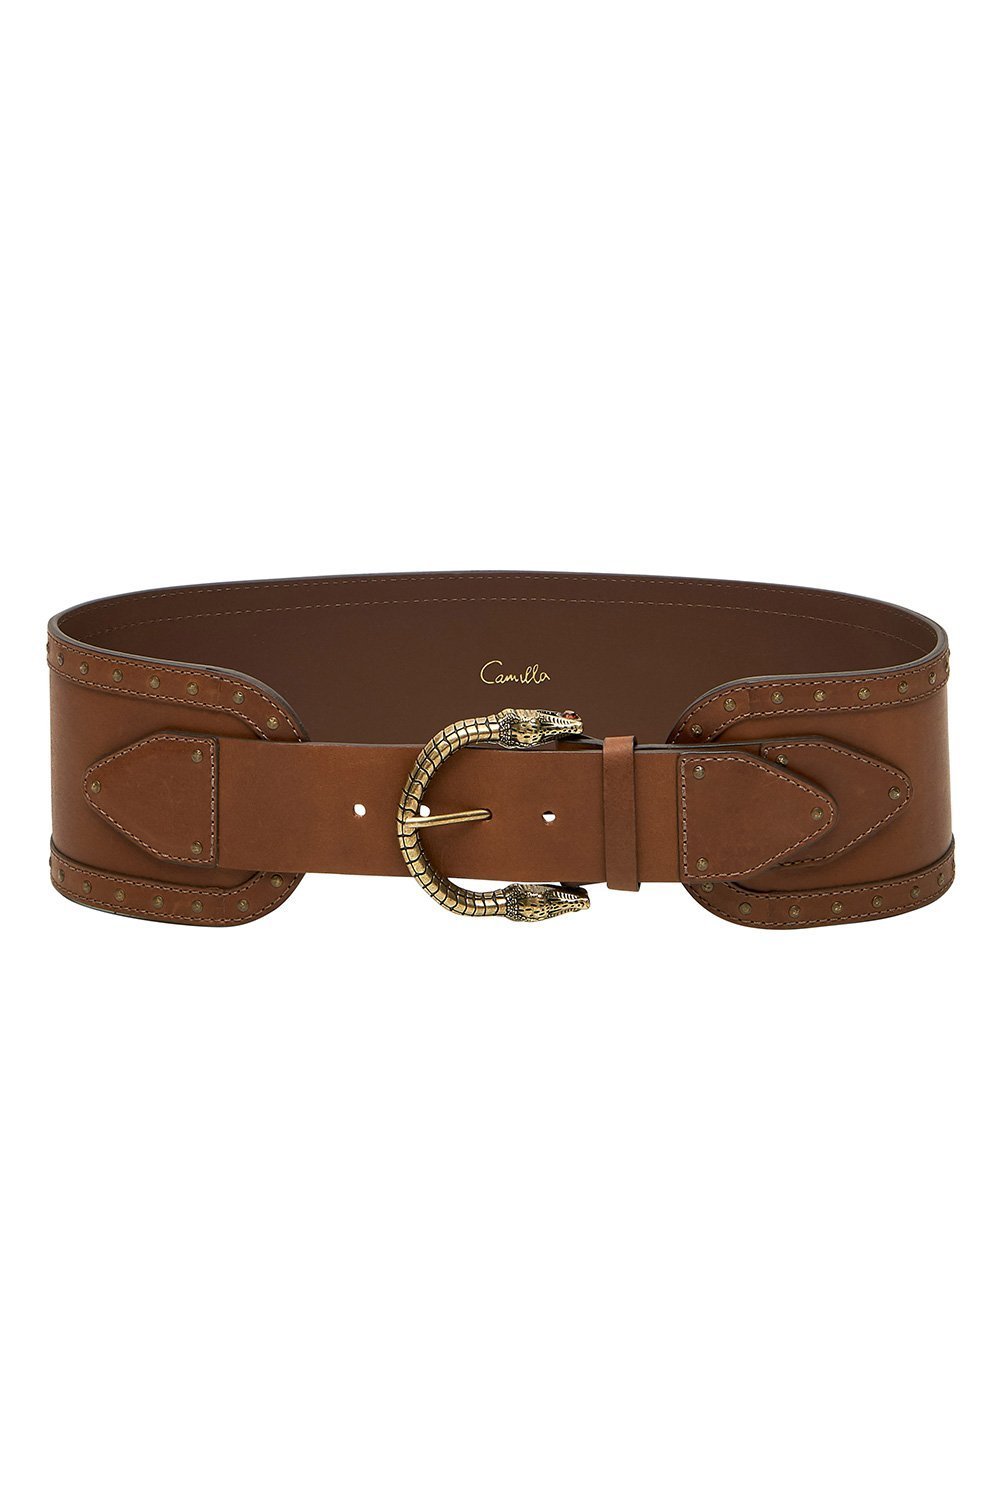 CINCHED LEATHER BELT TAN